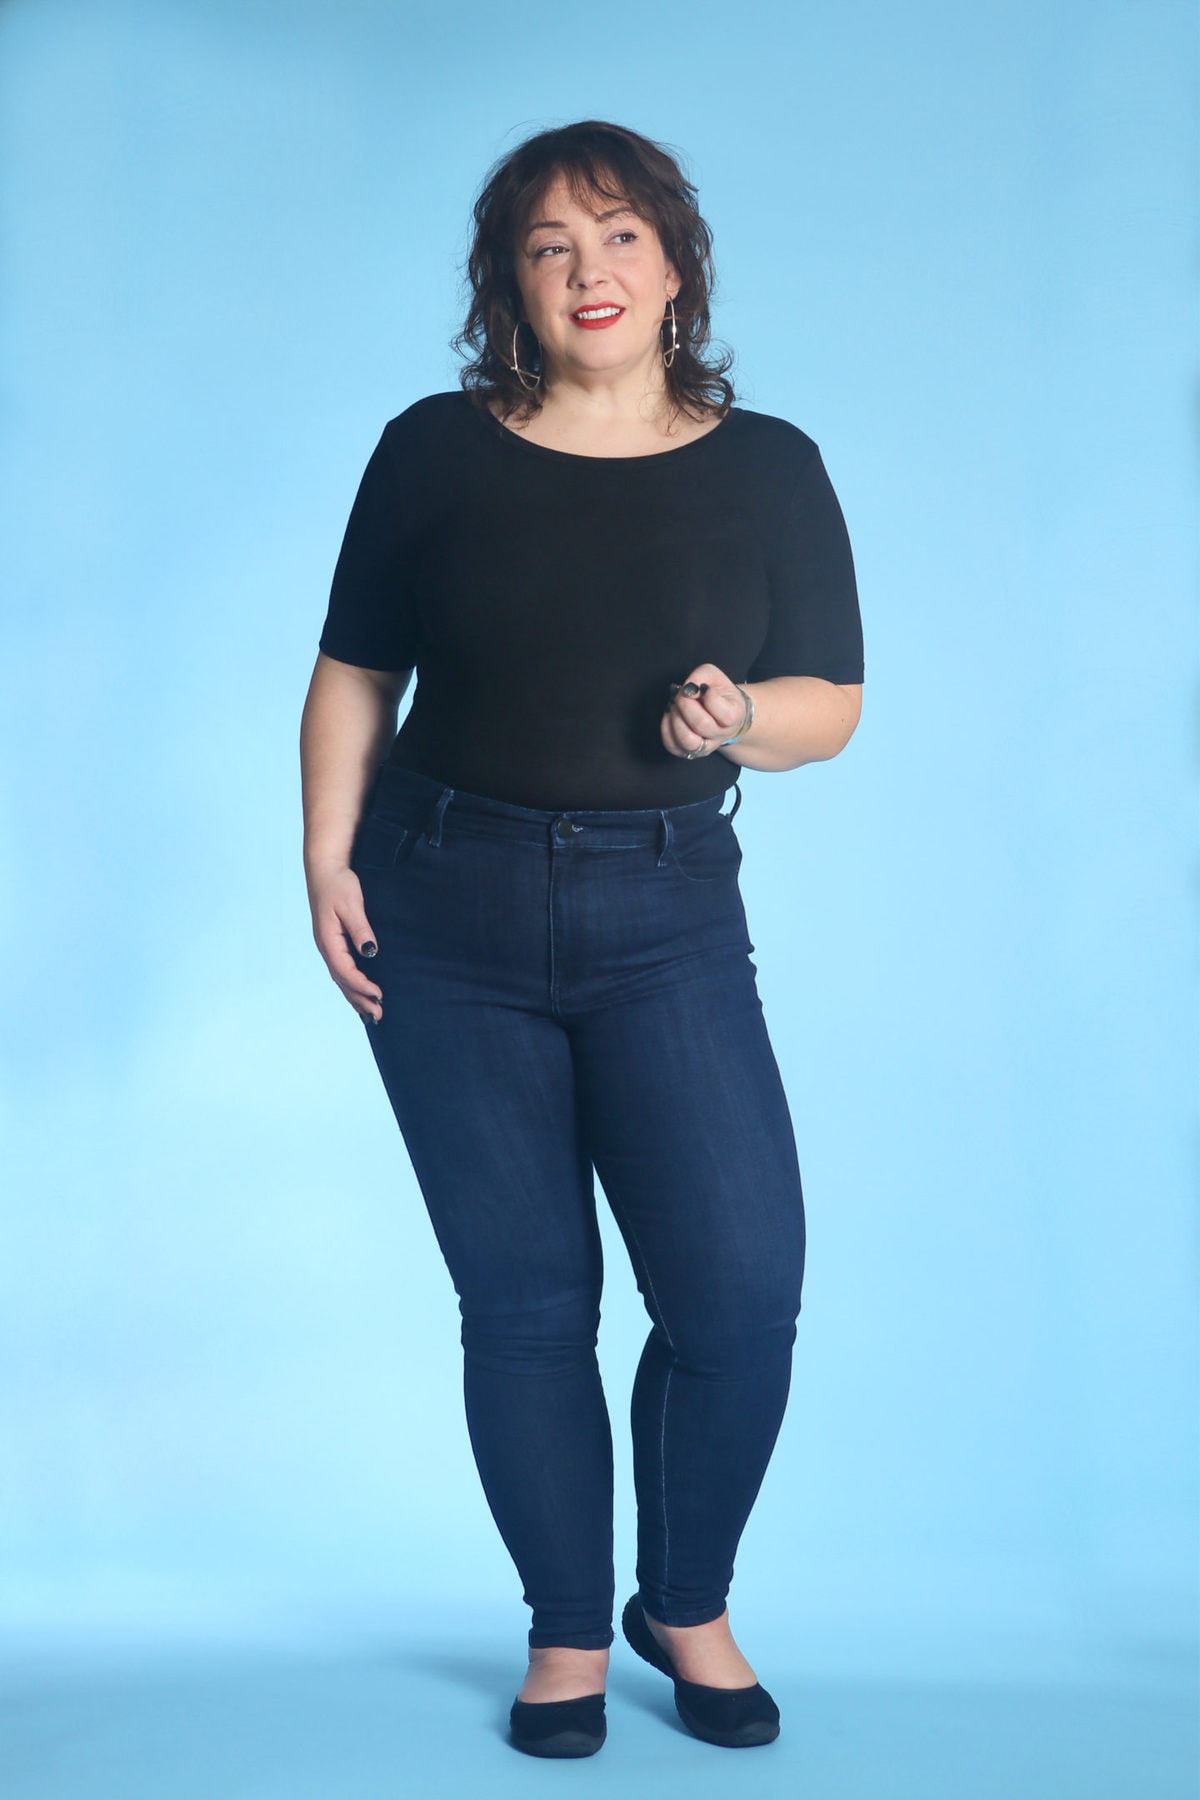 A review of Mott & Bow High-Rise Skinny Jeans by Wardrobe Oxygen